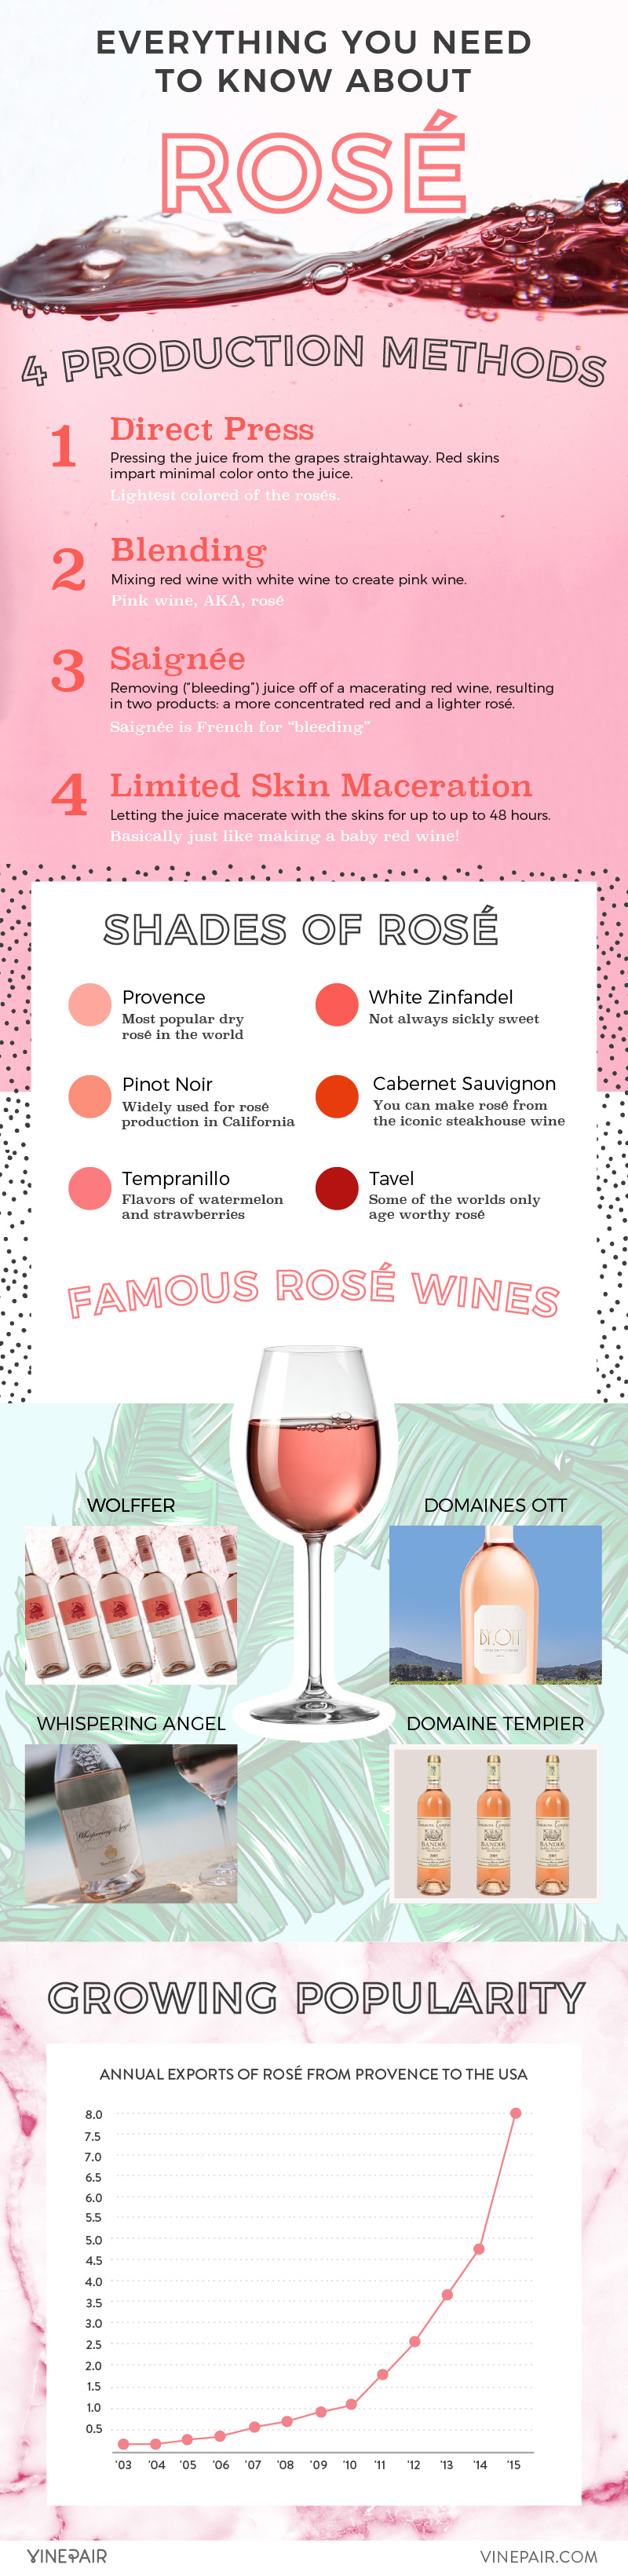 Infographic - Everything You Need to Know About Rose